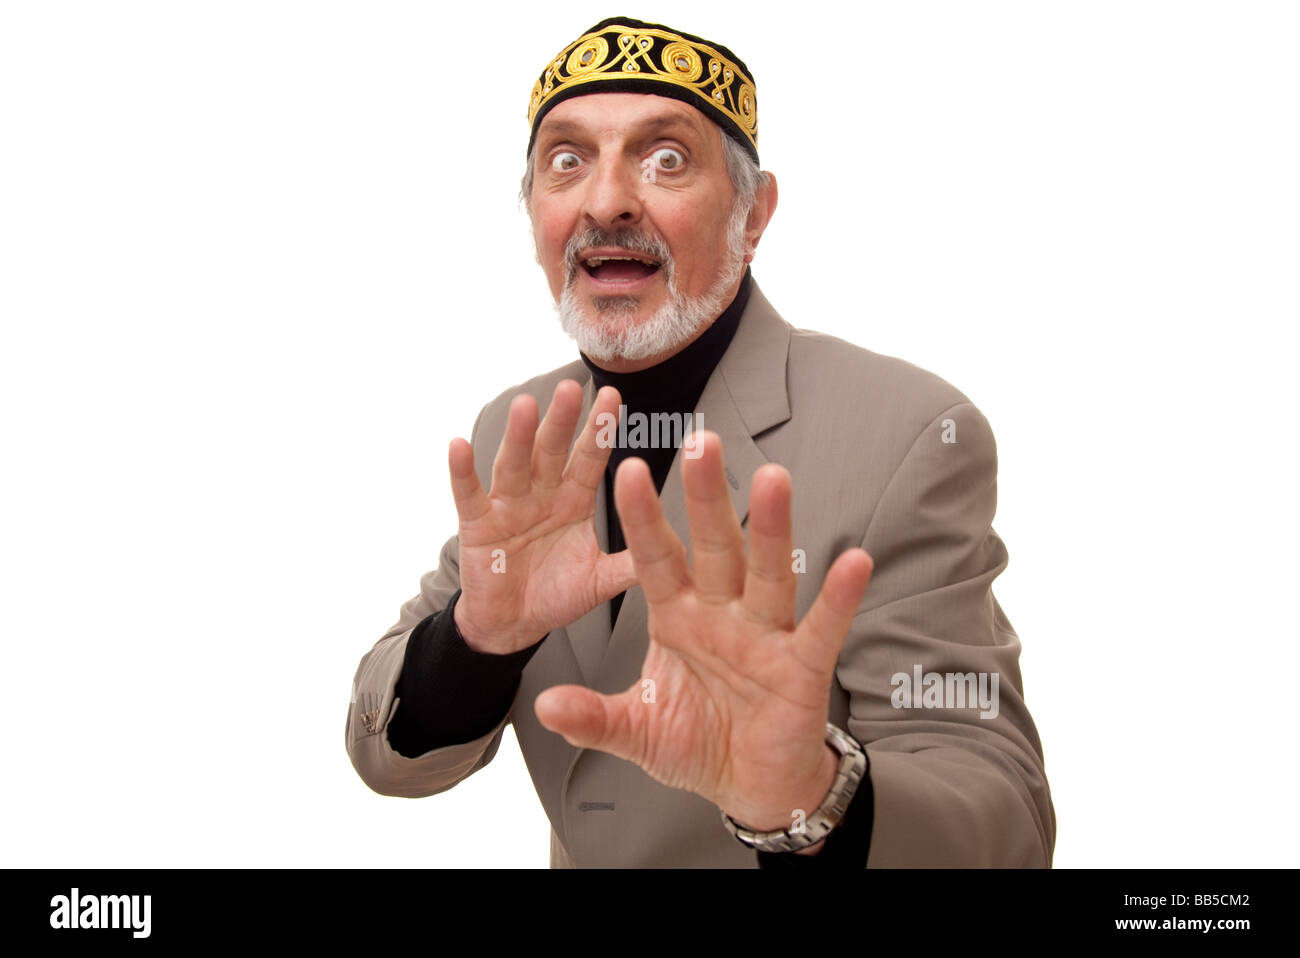 middle eastern man gesture Stock Photo